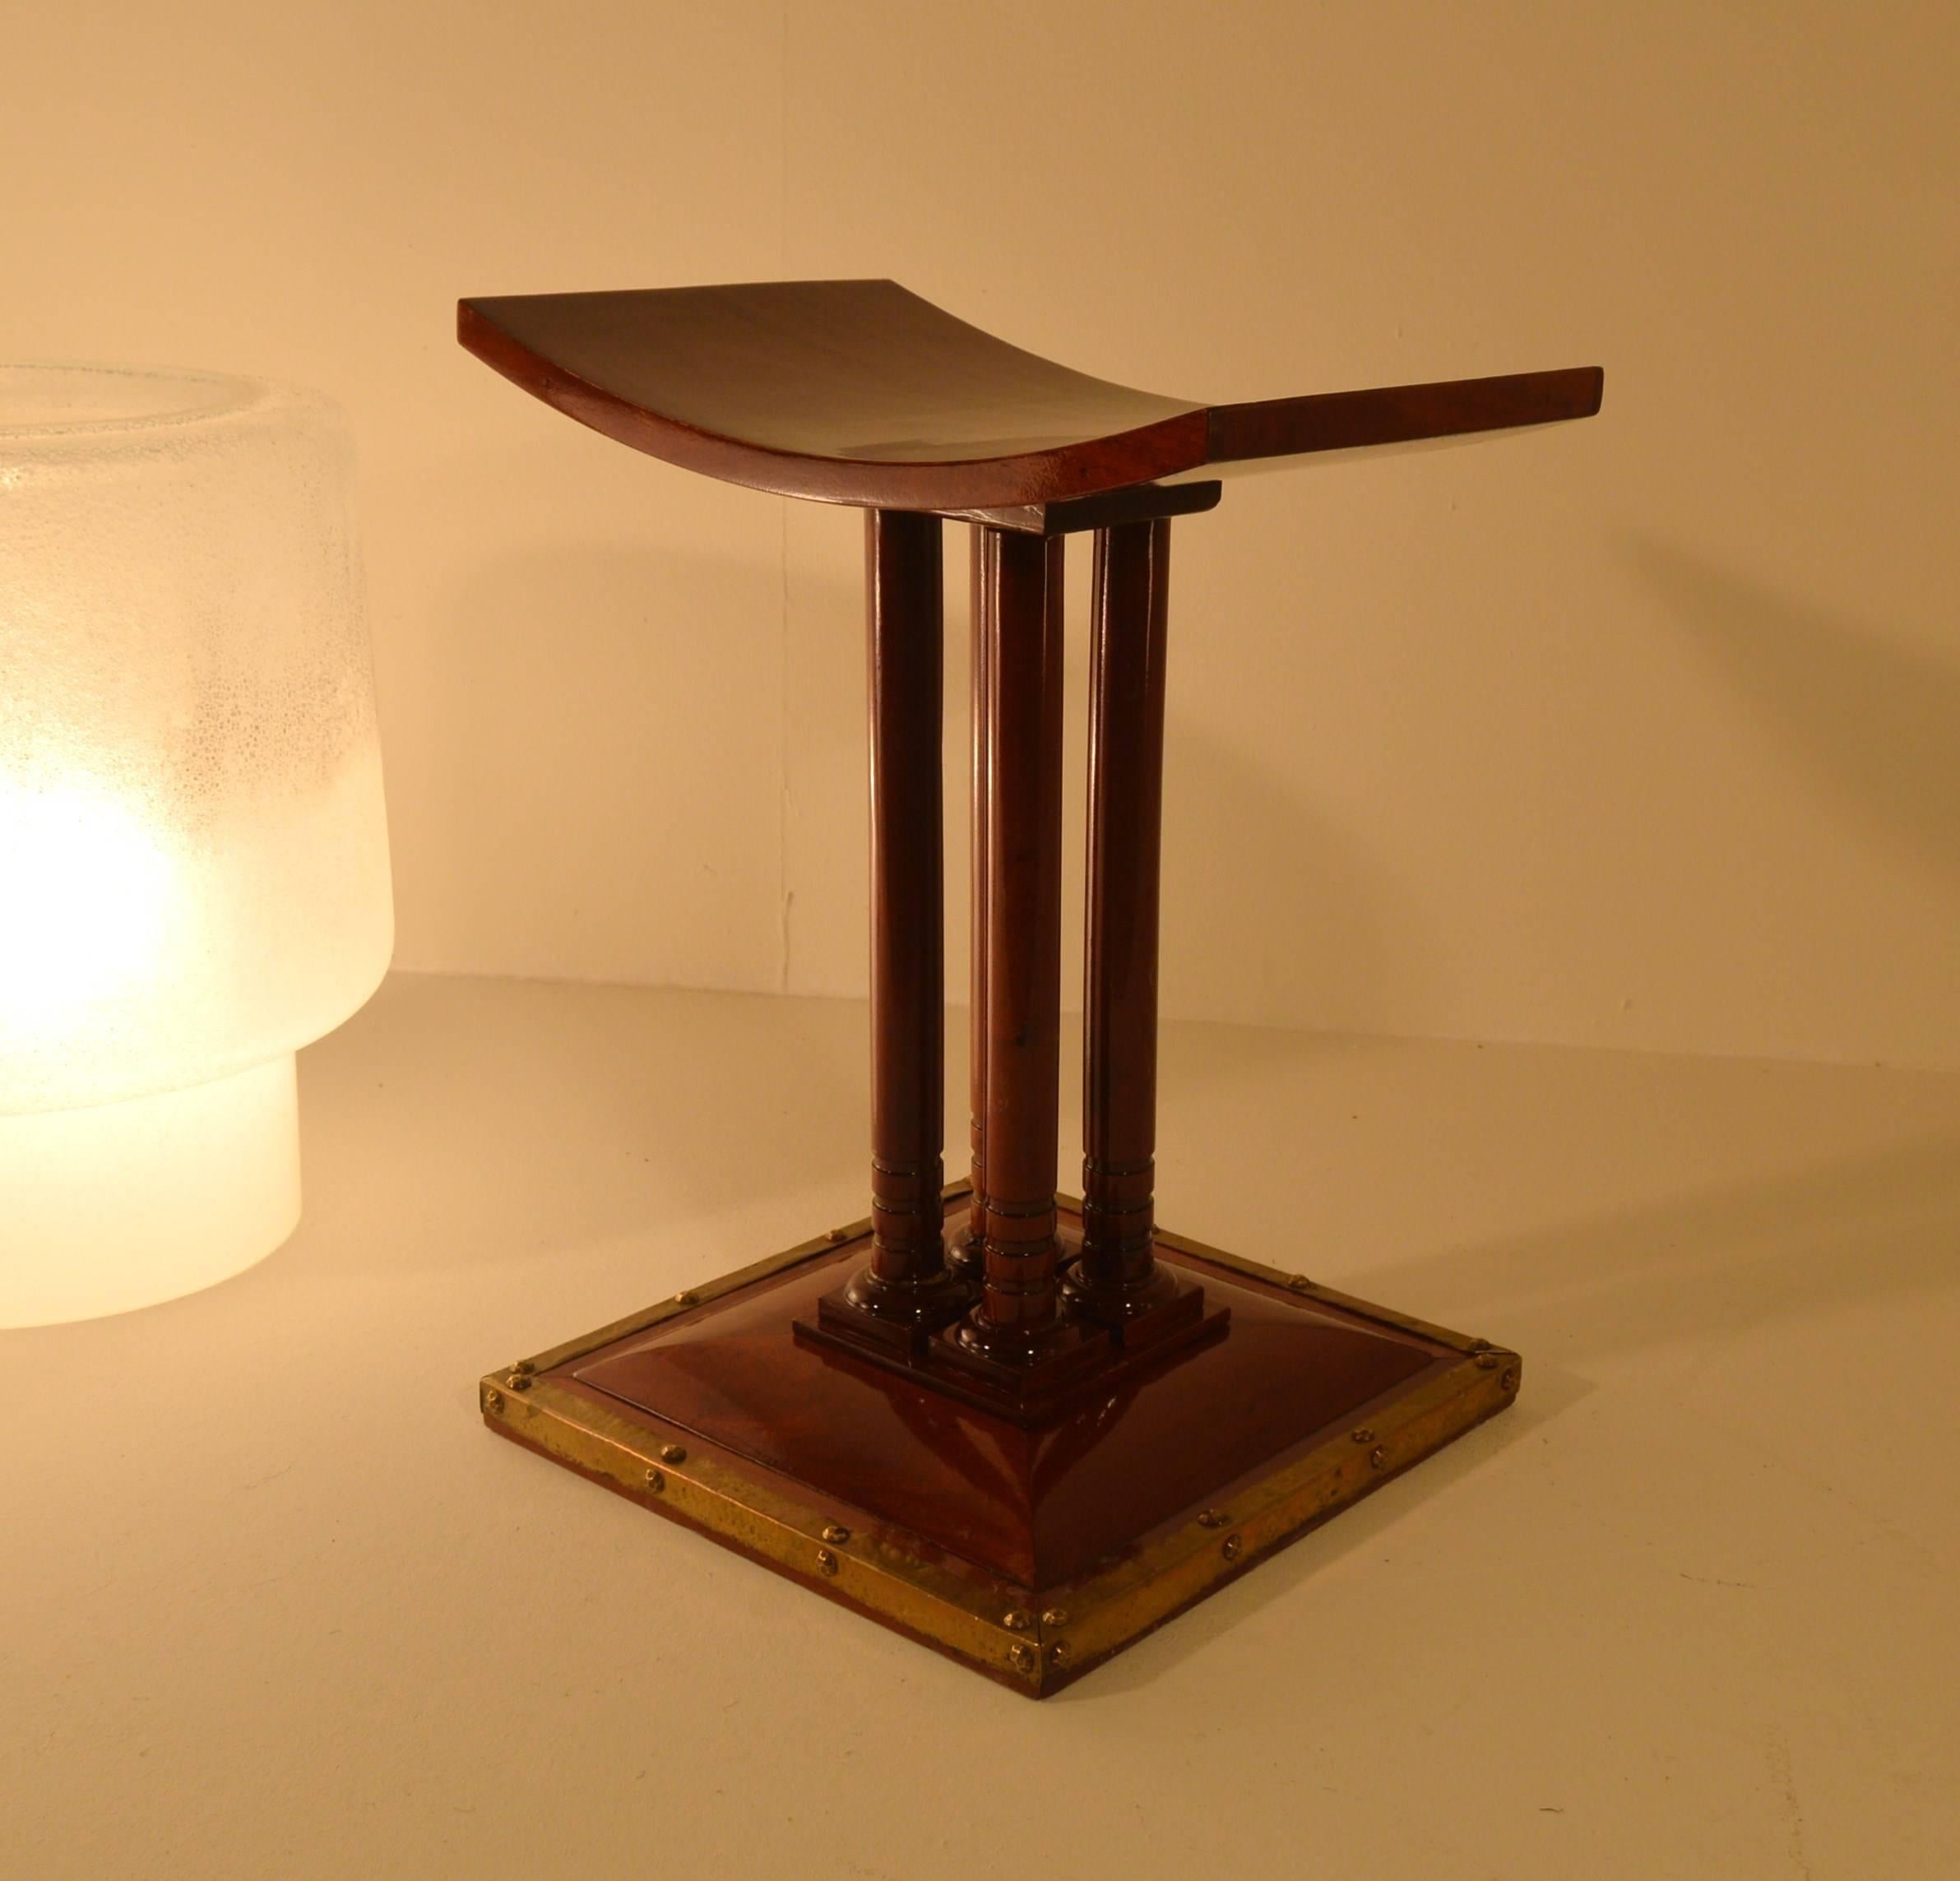 Very elegant tabouret in solid Cuba-mahogany, circa 1930. The base is decorated with a copper frame and sturdy nails.